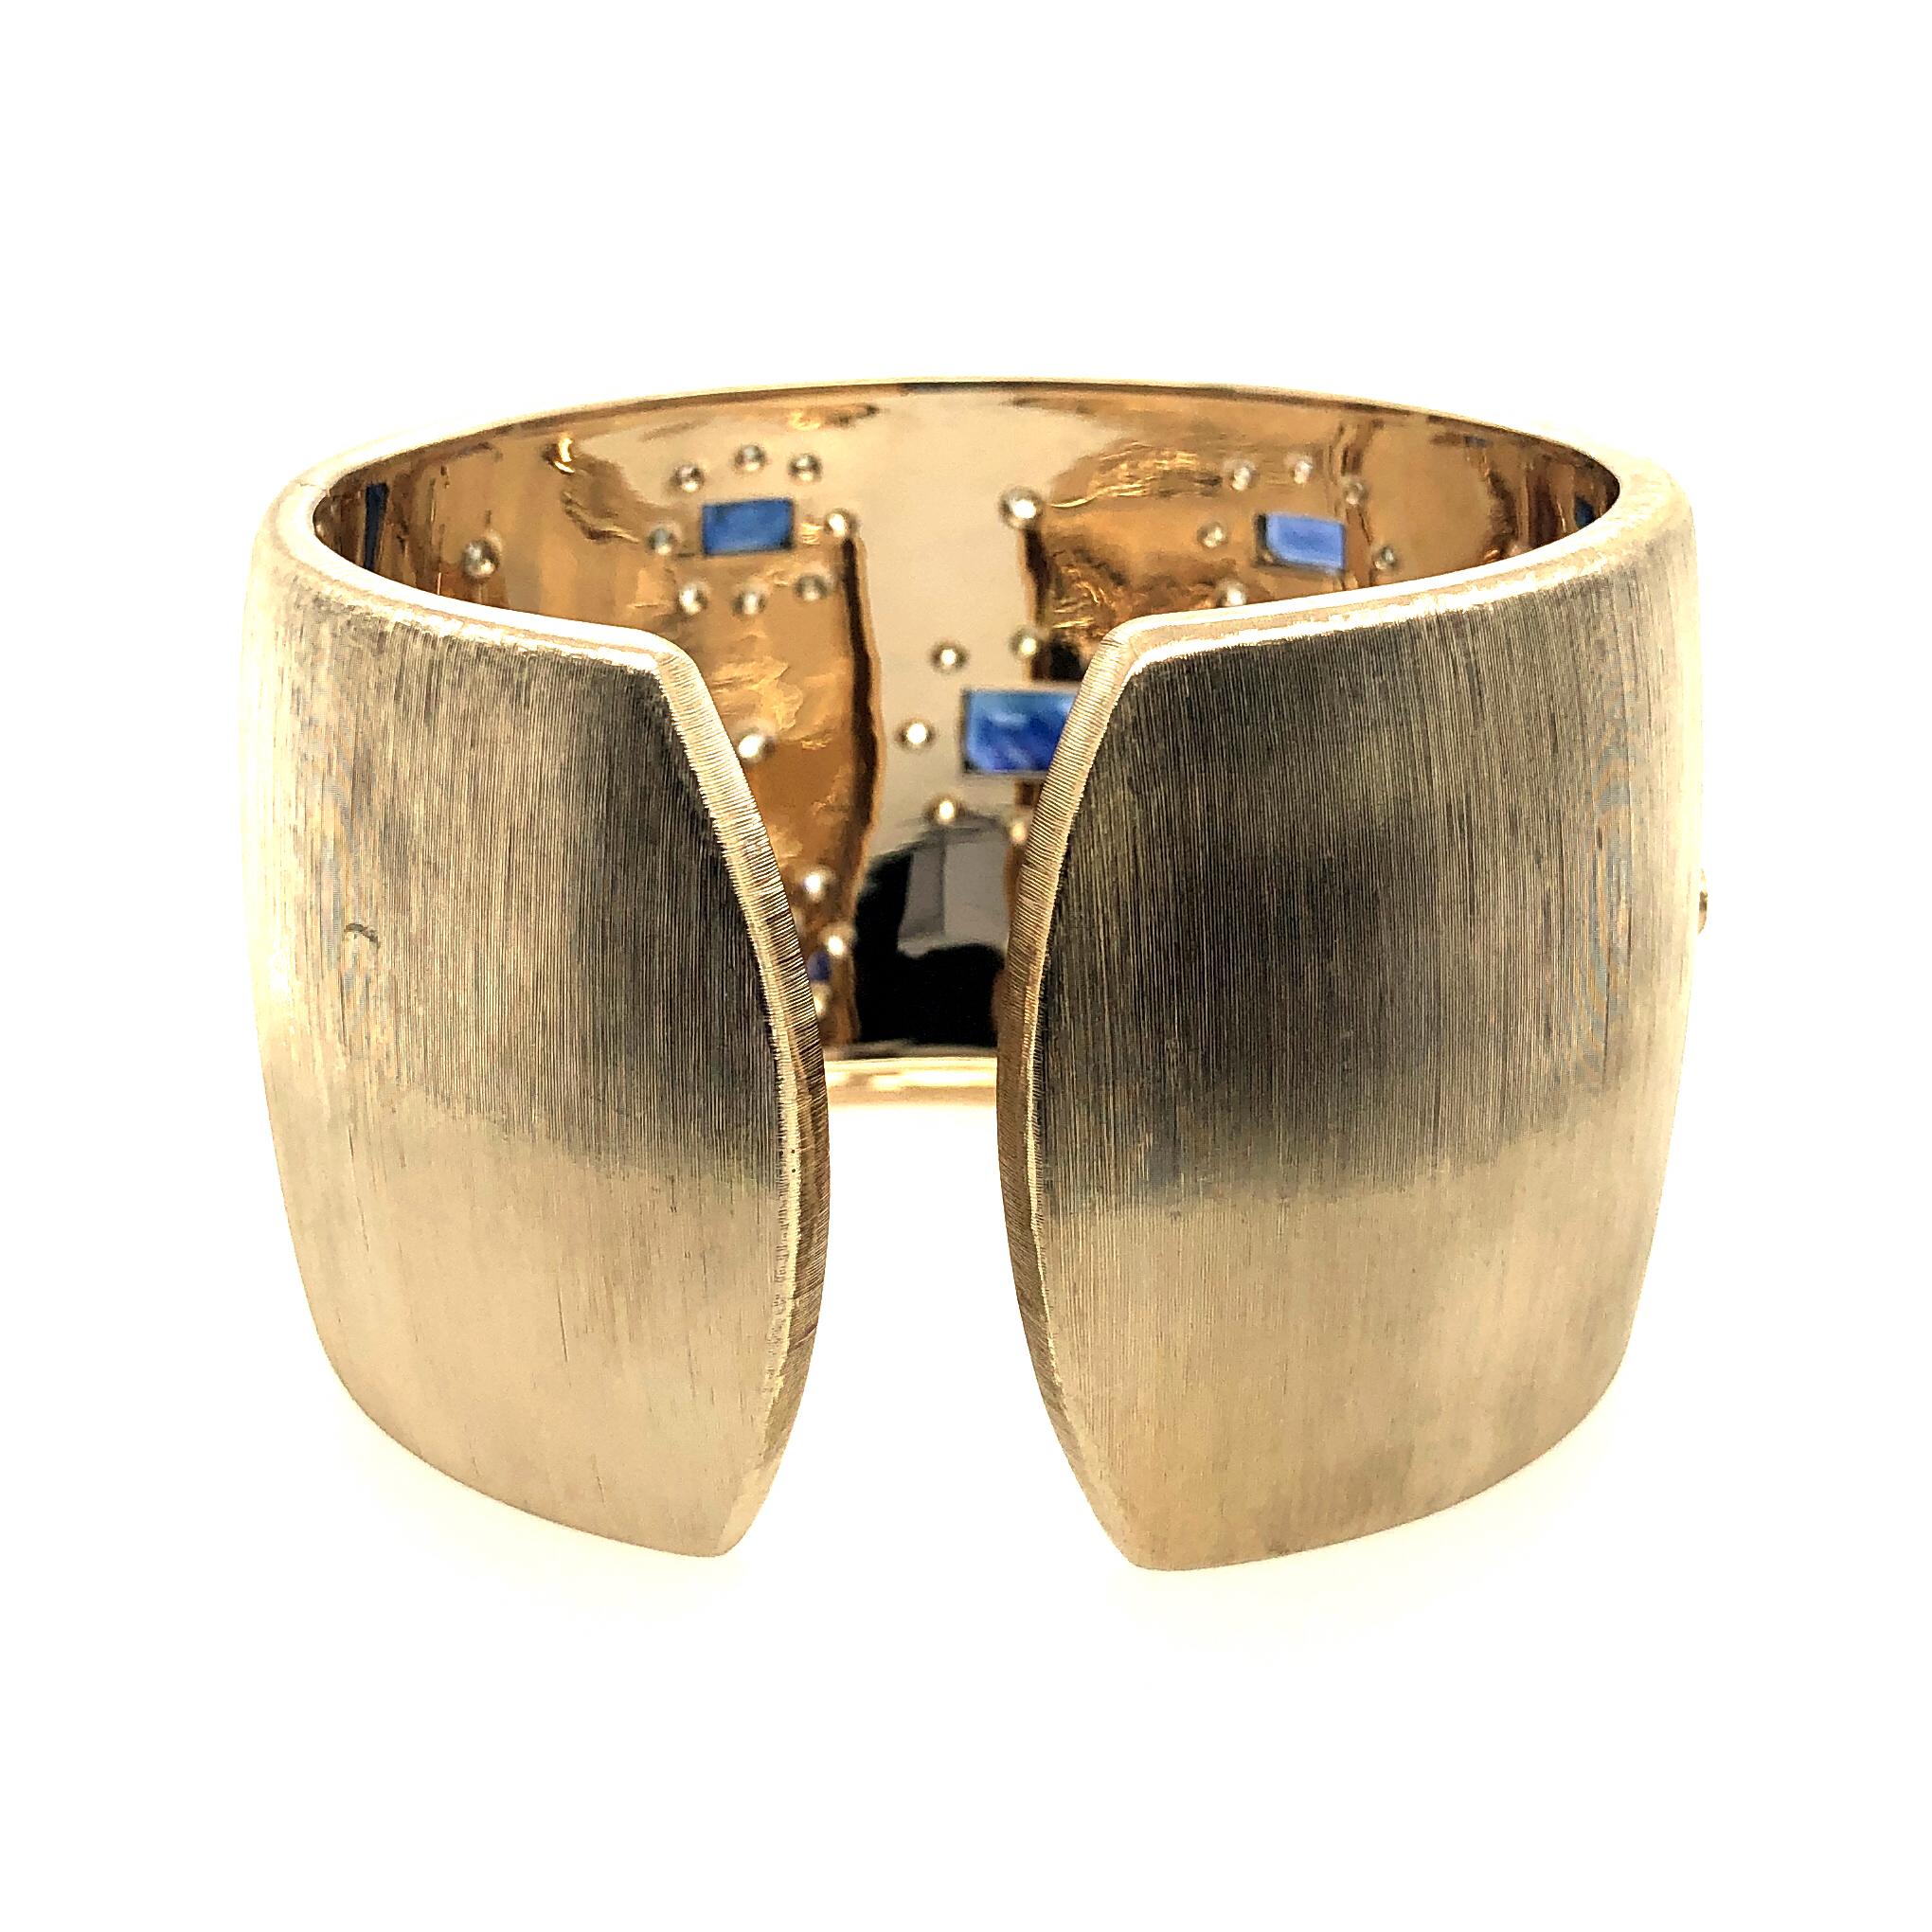 Offered here is a gorgeous sapphire and diamond cuff bangle in 18kt gold.
The cuff is extremely well made. The bangle is 18kt yellow gold ( marked 750 ITALY 2144M ). The bangle weighs 104.7 grams, measures almost 1.75” wide and 7.25” in length. The